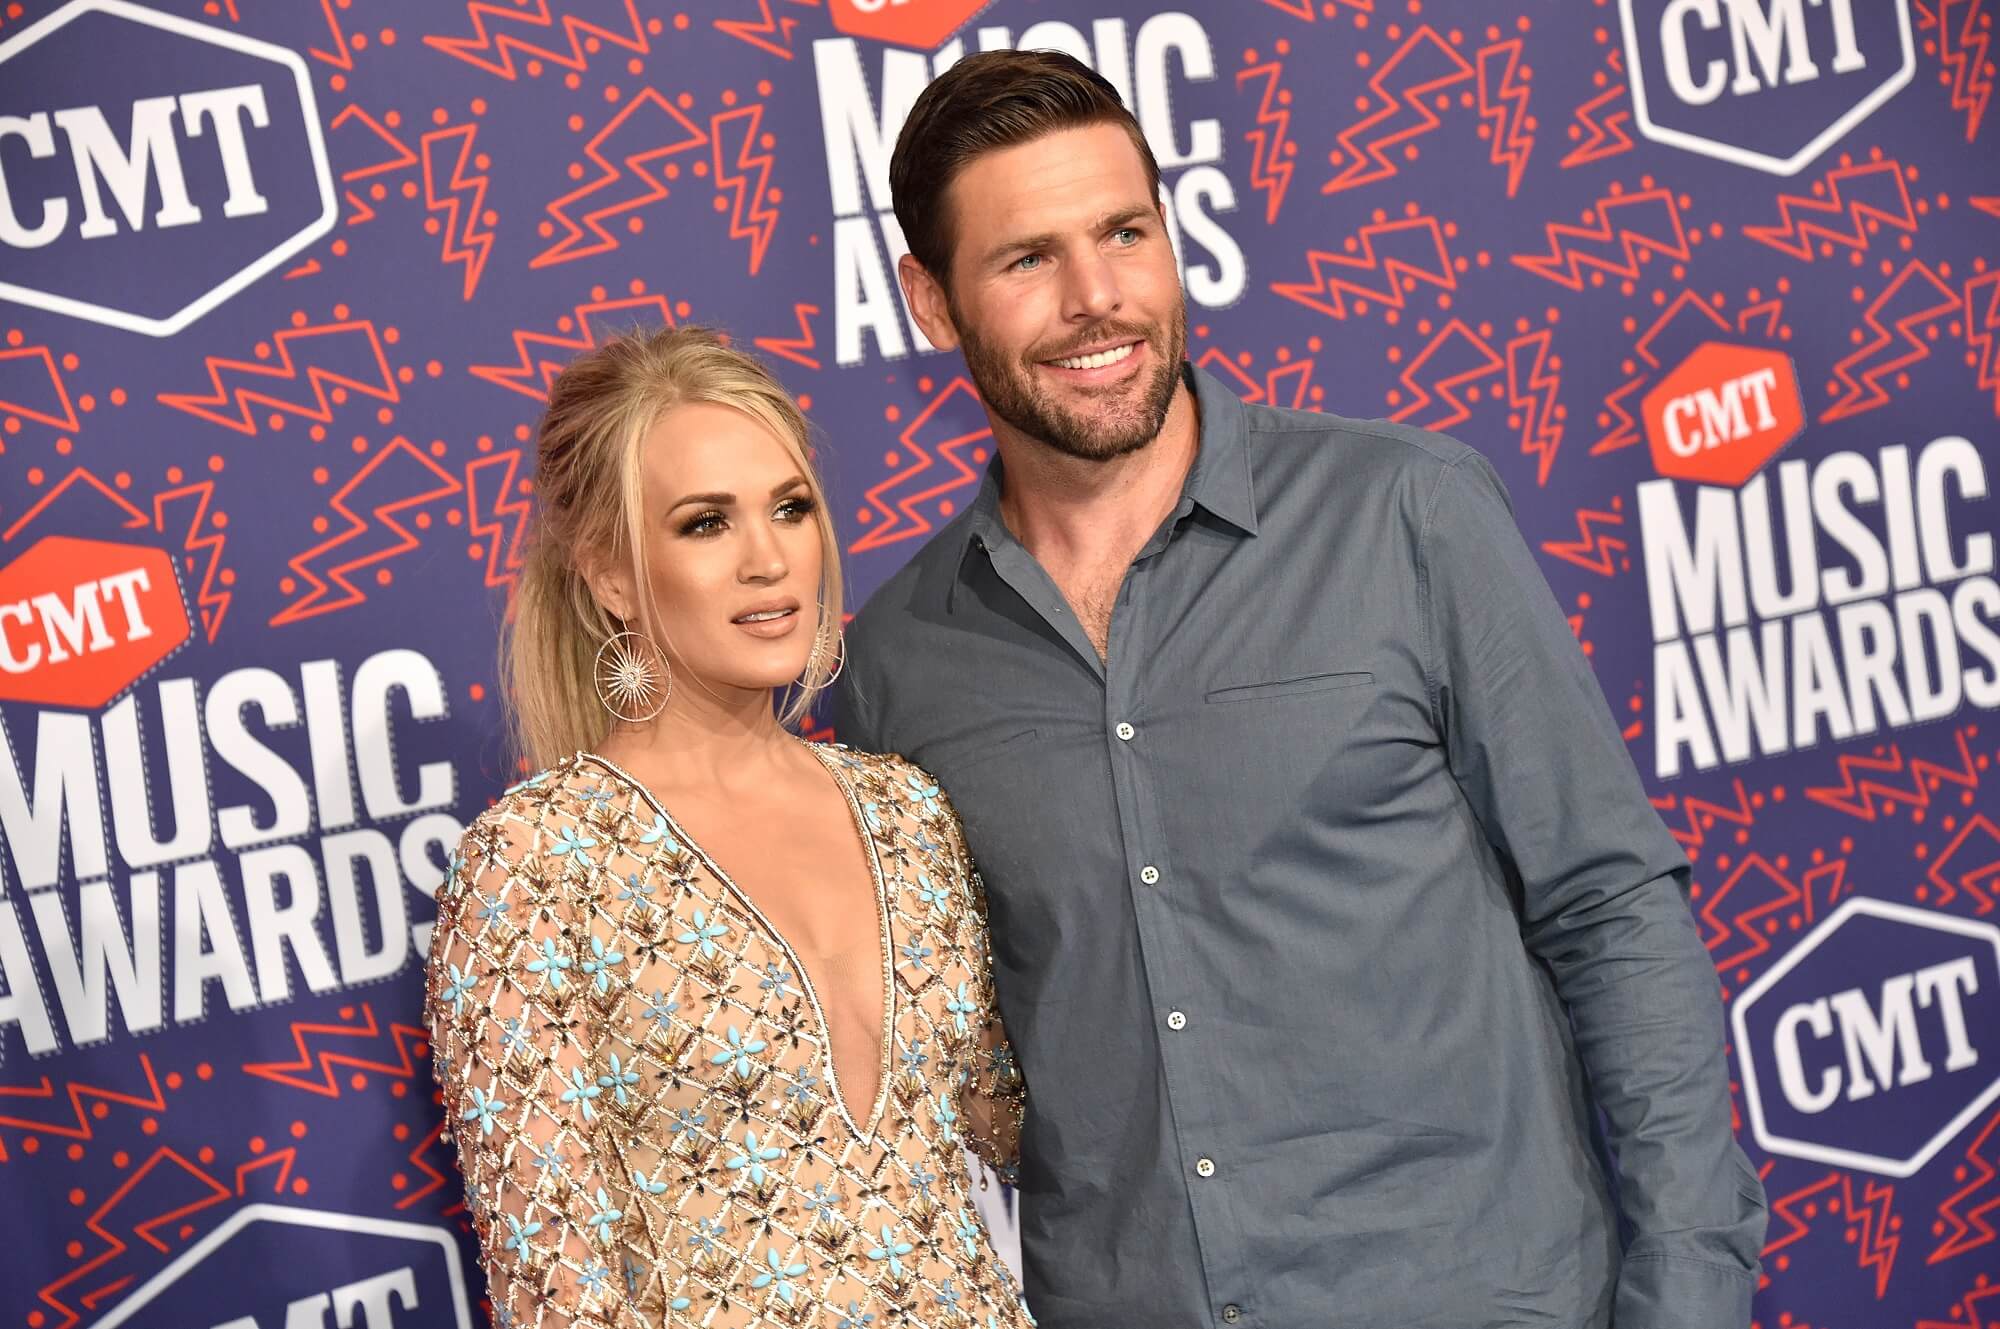 Carrie Underwood and Mike Fisher stand arm-in-arm in front of a backdrop that reads 'CMT Music Awards'